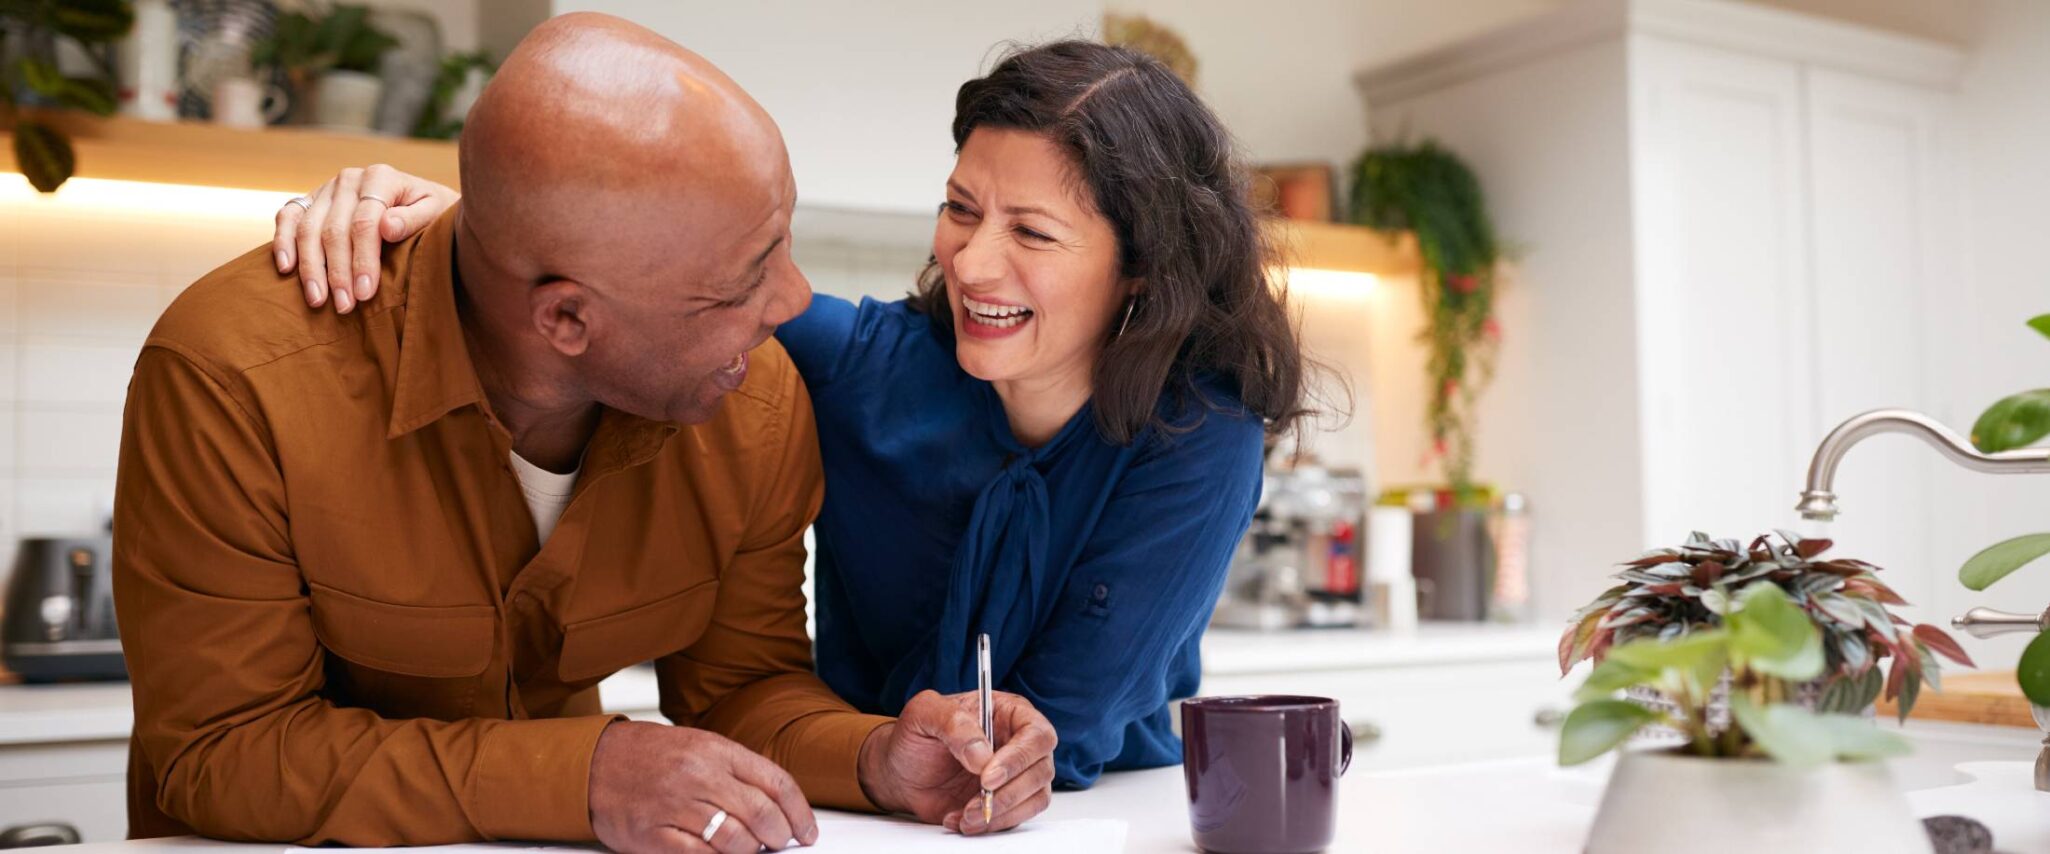 young couple laughing while writing on paper in a kitchen